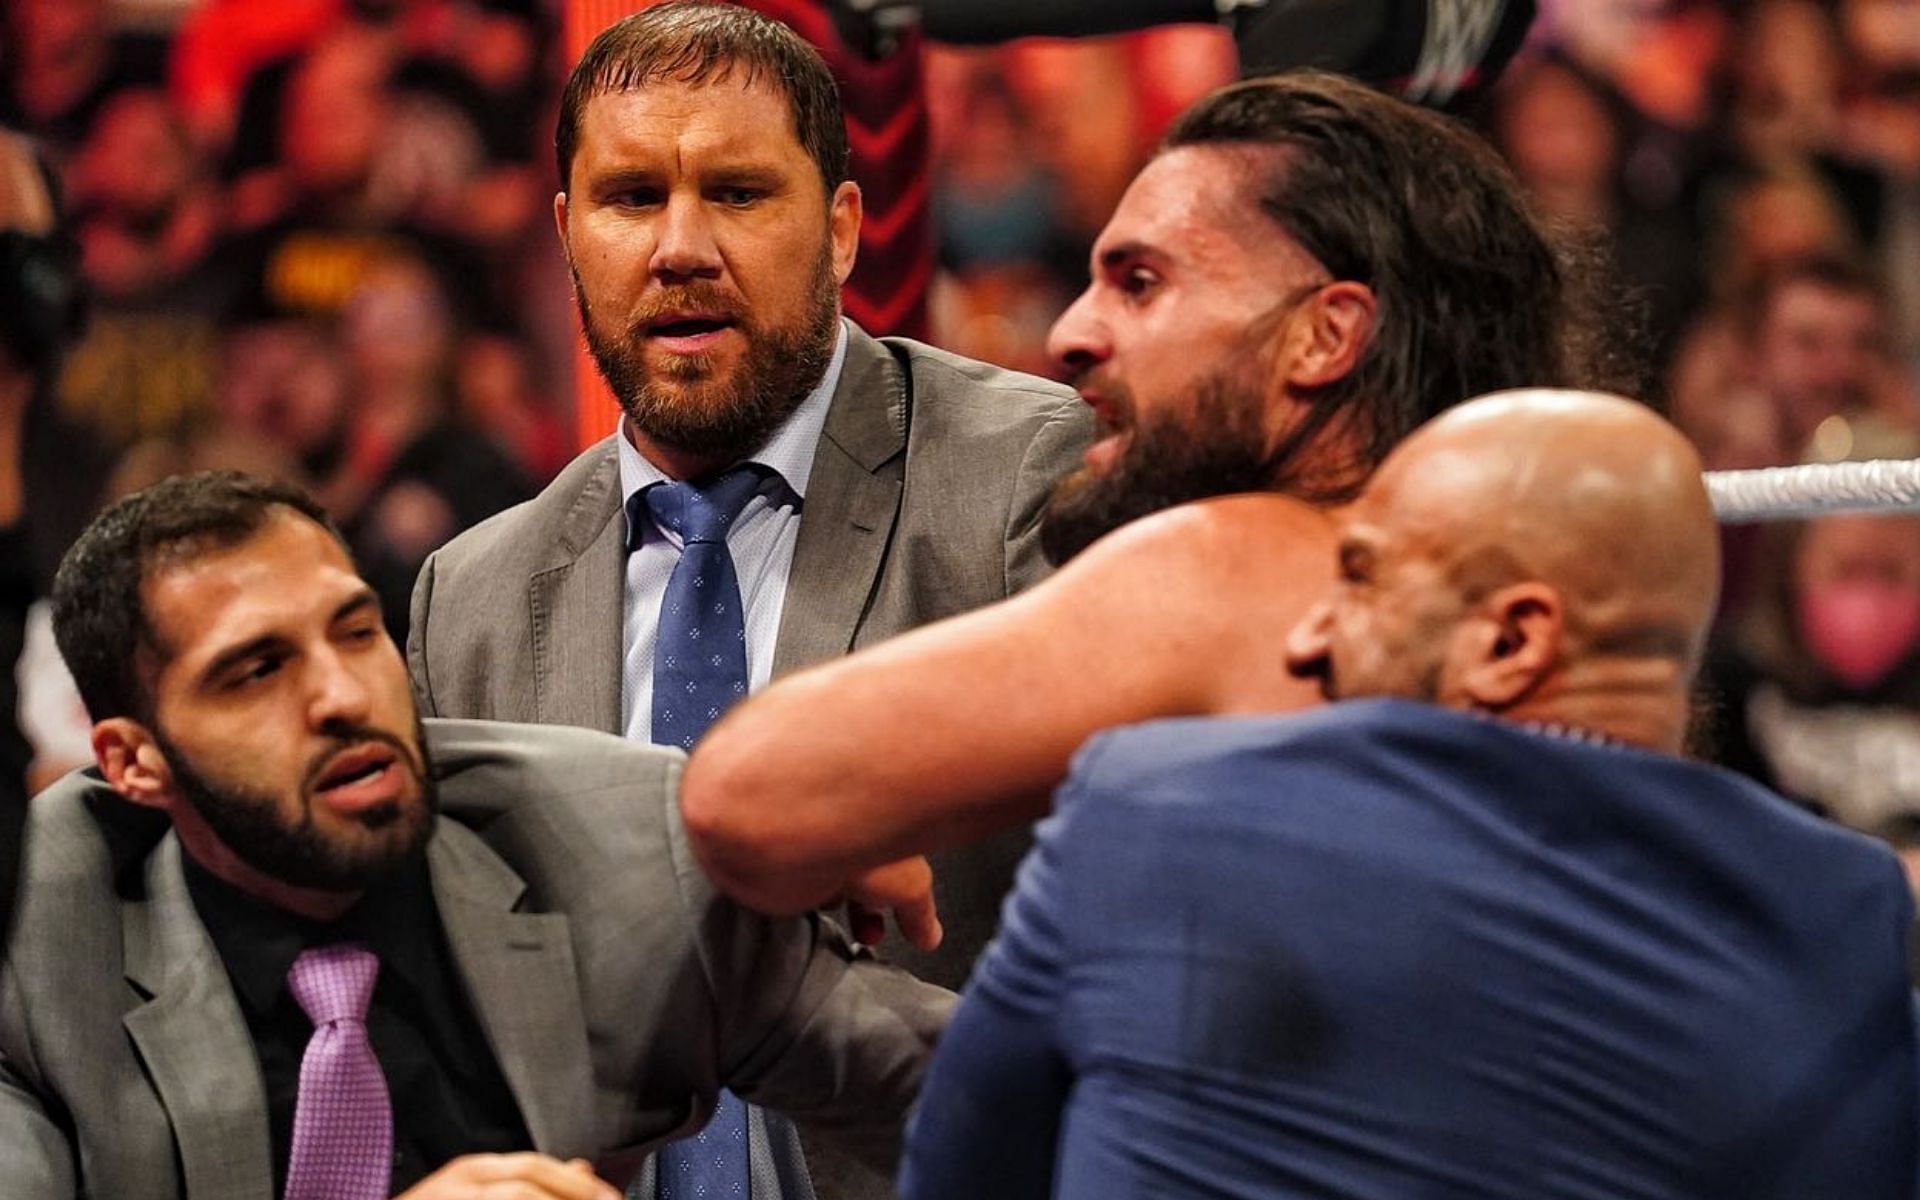 Curtis Axel surprised wrestling fans all over by making a surprise RAW appearance